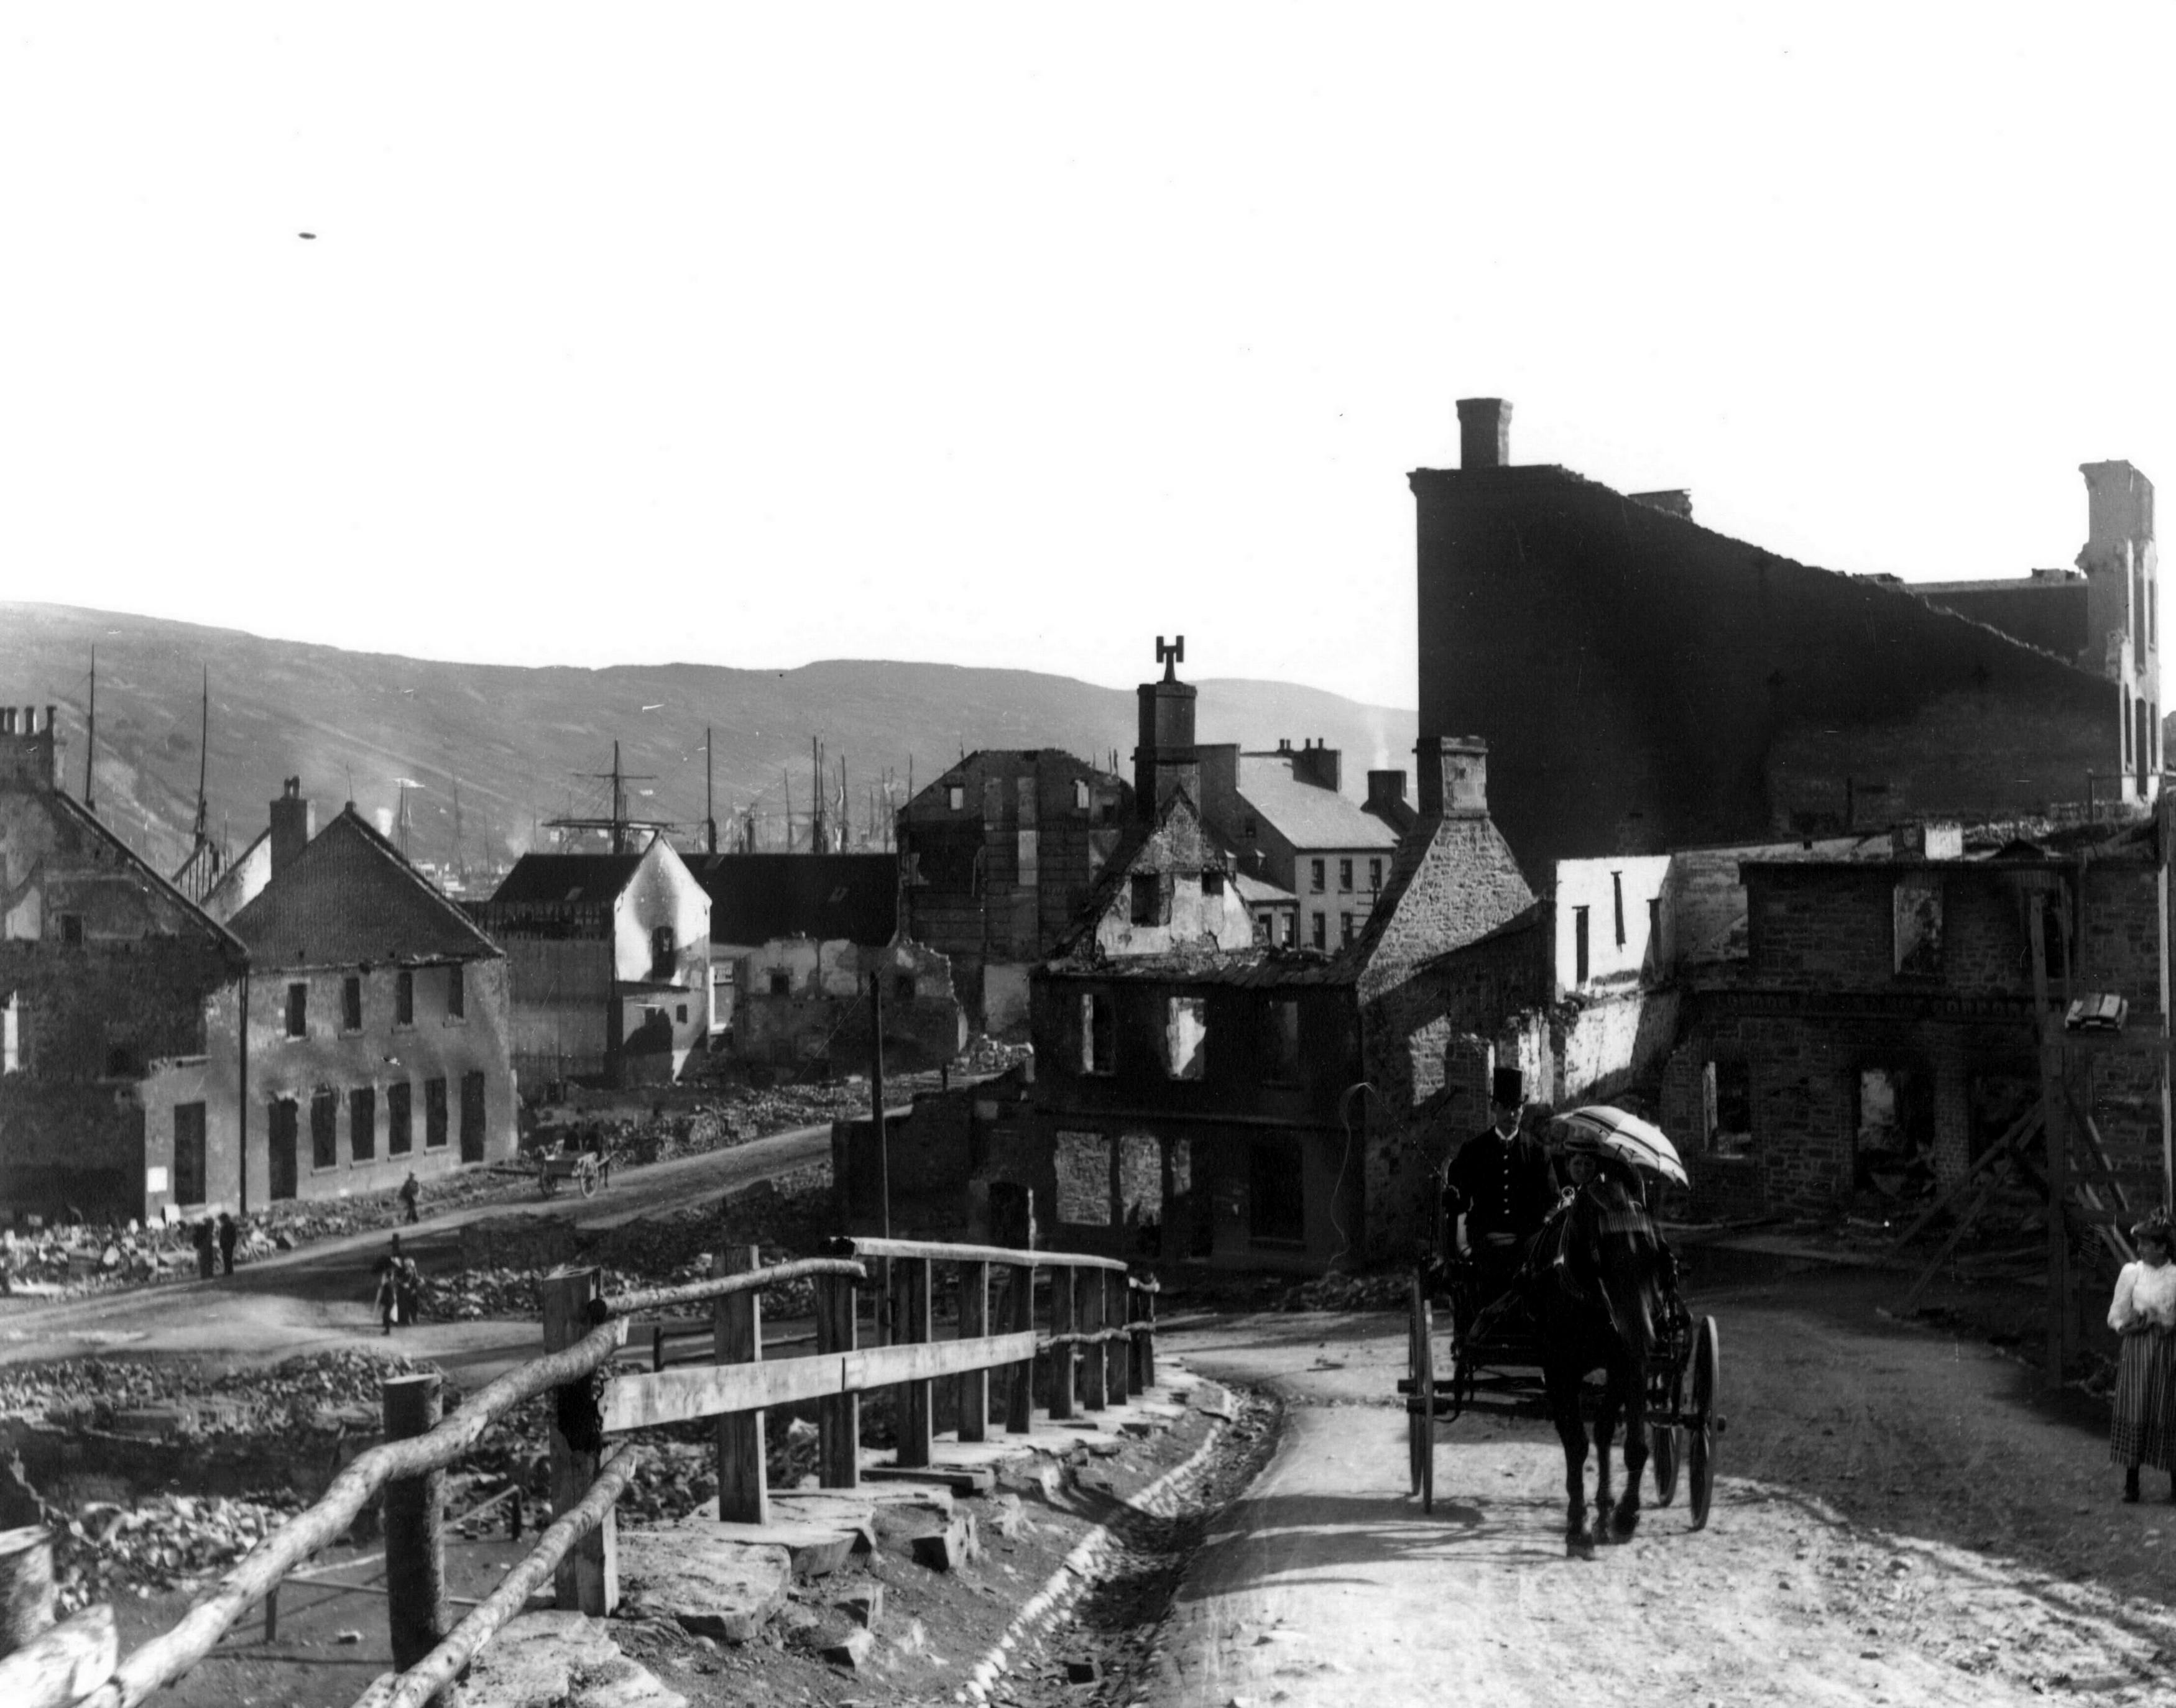 1892: A horse and buggy coming up McBride's Hill after the Great Fire of 1892. The ruins of part of Water Street are in the background.